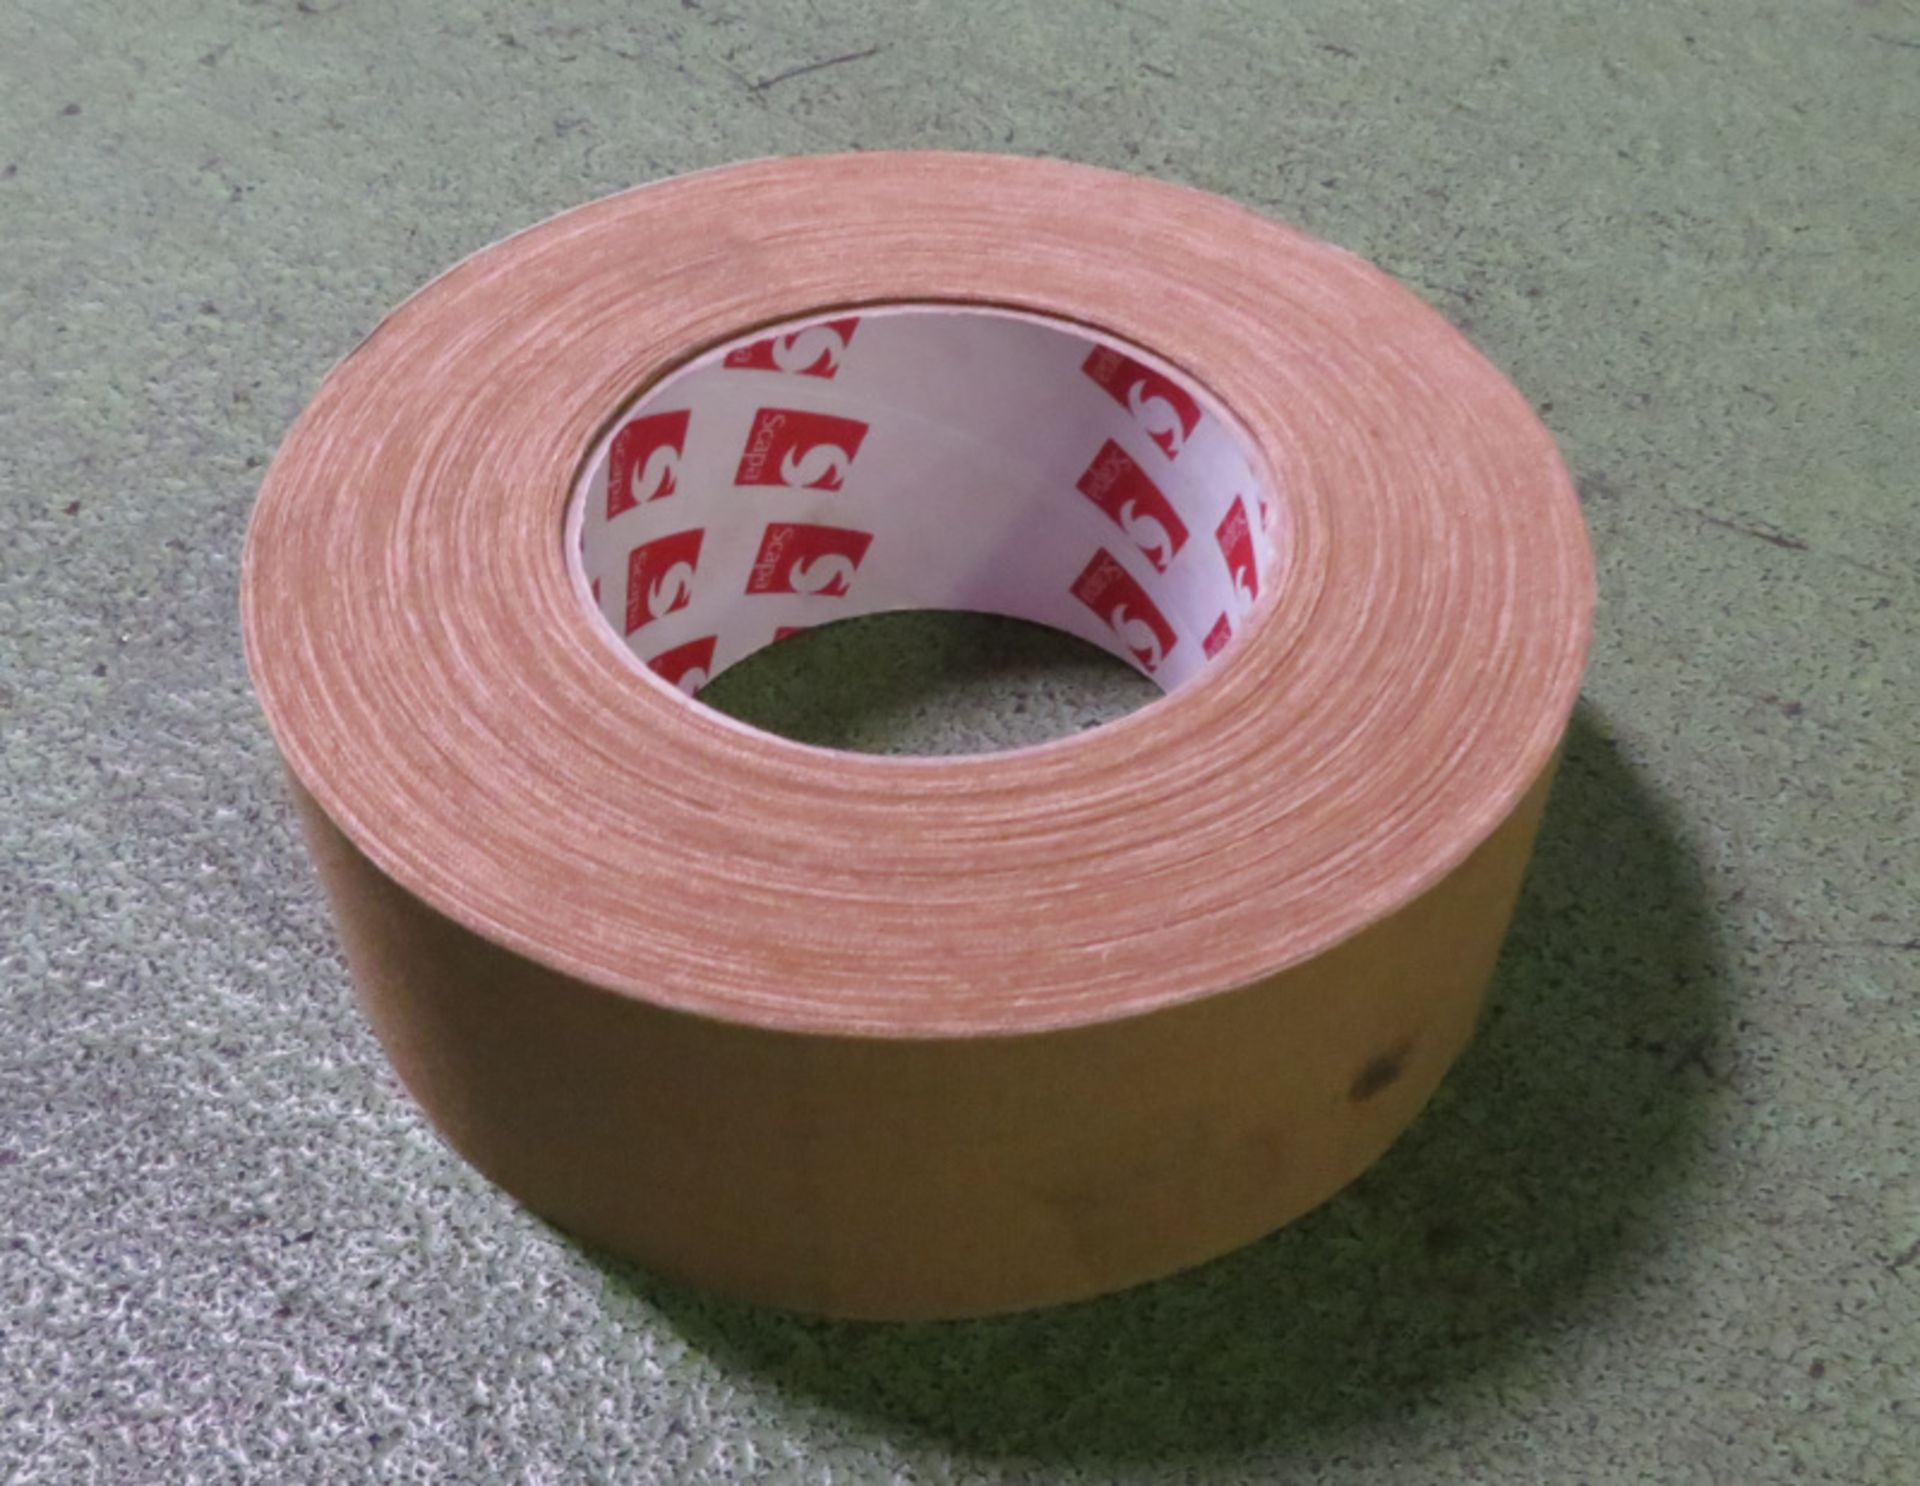 Scapa Pro 3302 Beige Cloth Adhesive Tape - 50mm x 50m - 2 Boxes - 16 rolls per box - Image 3 of 3